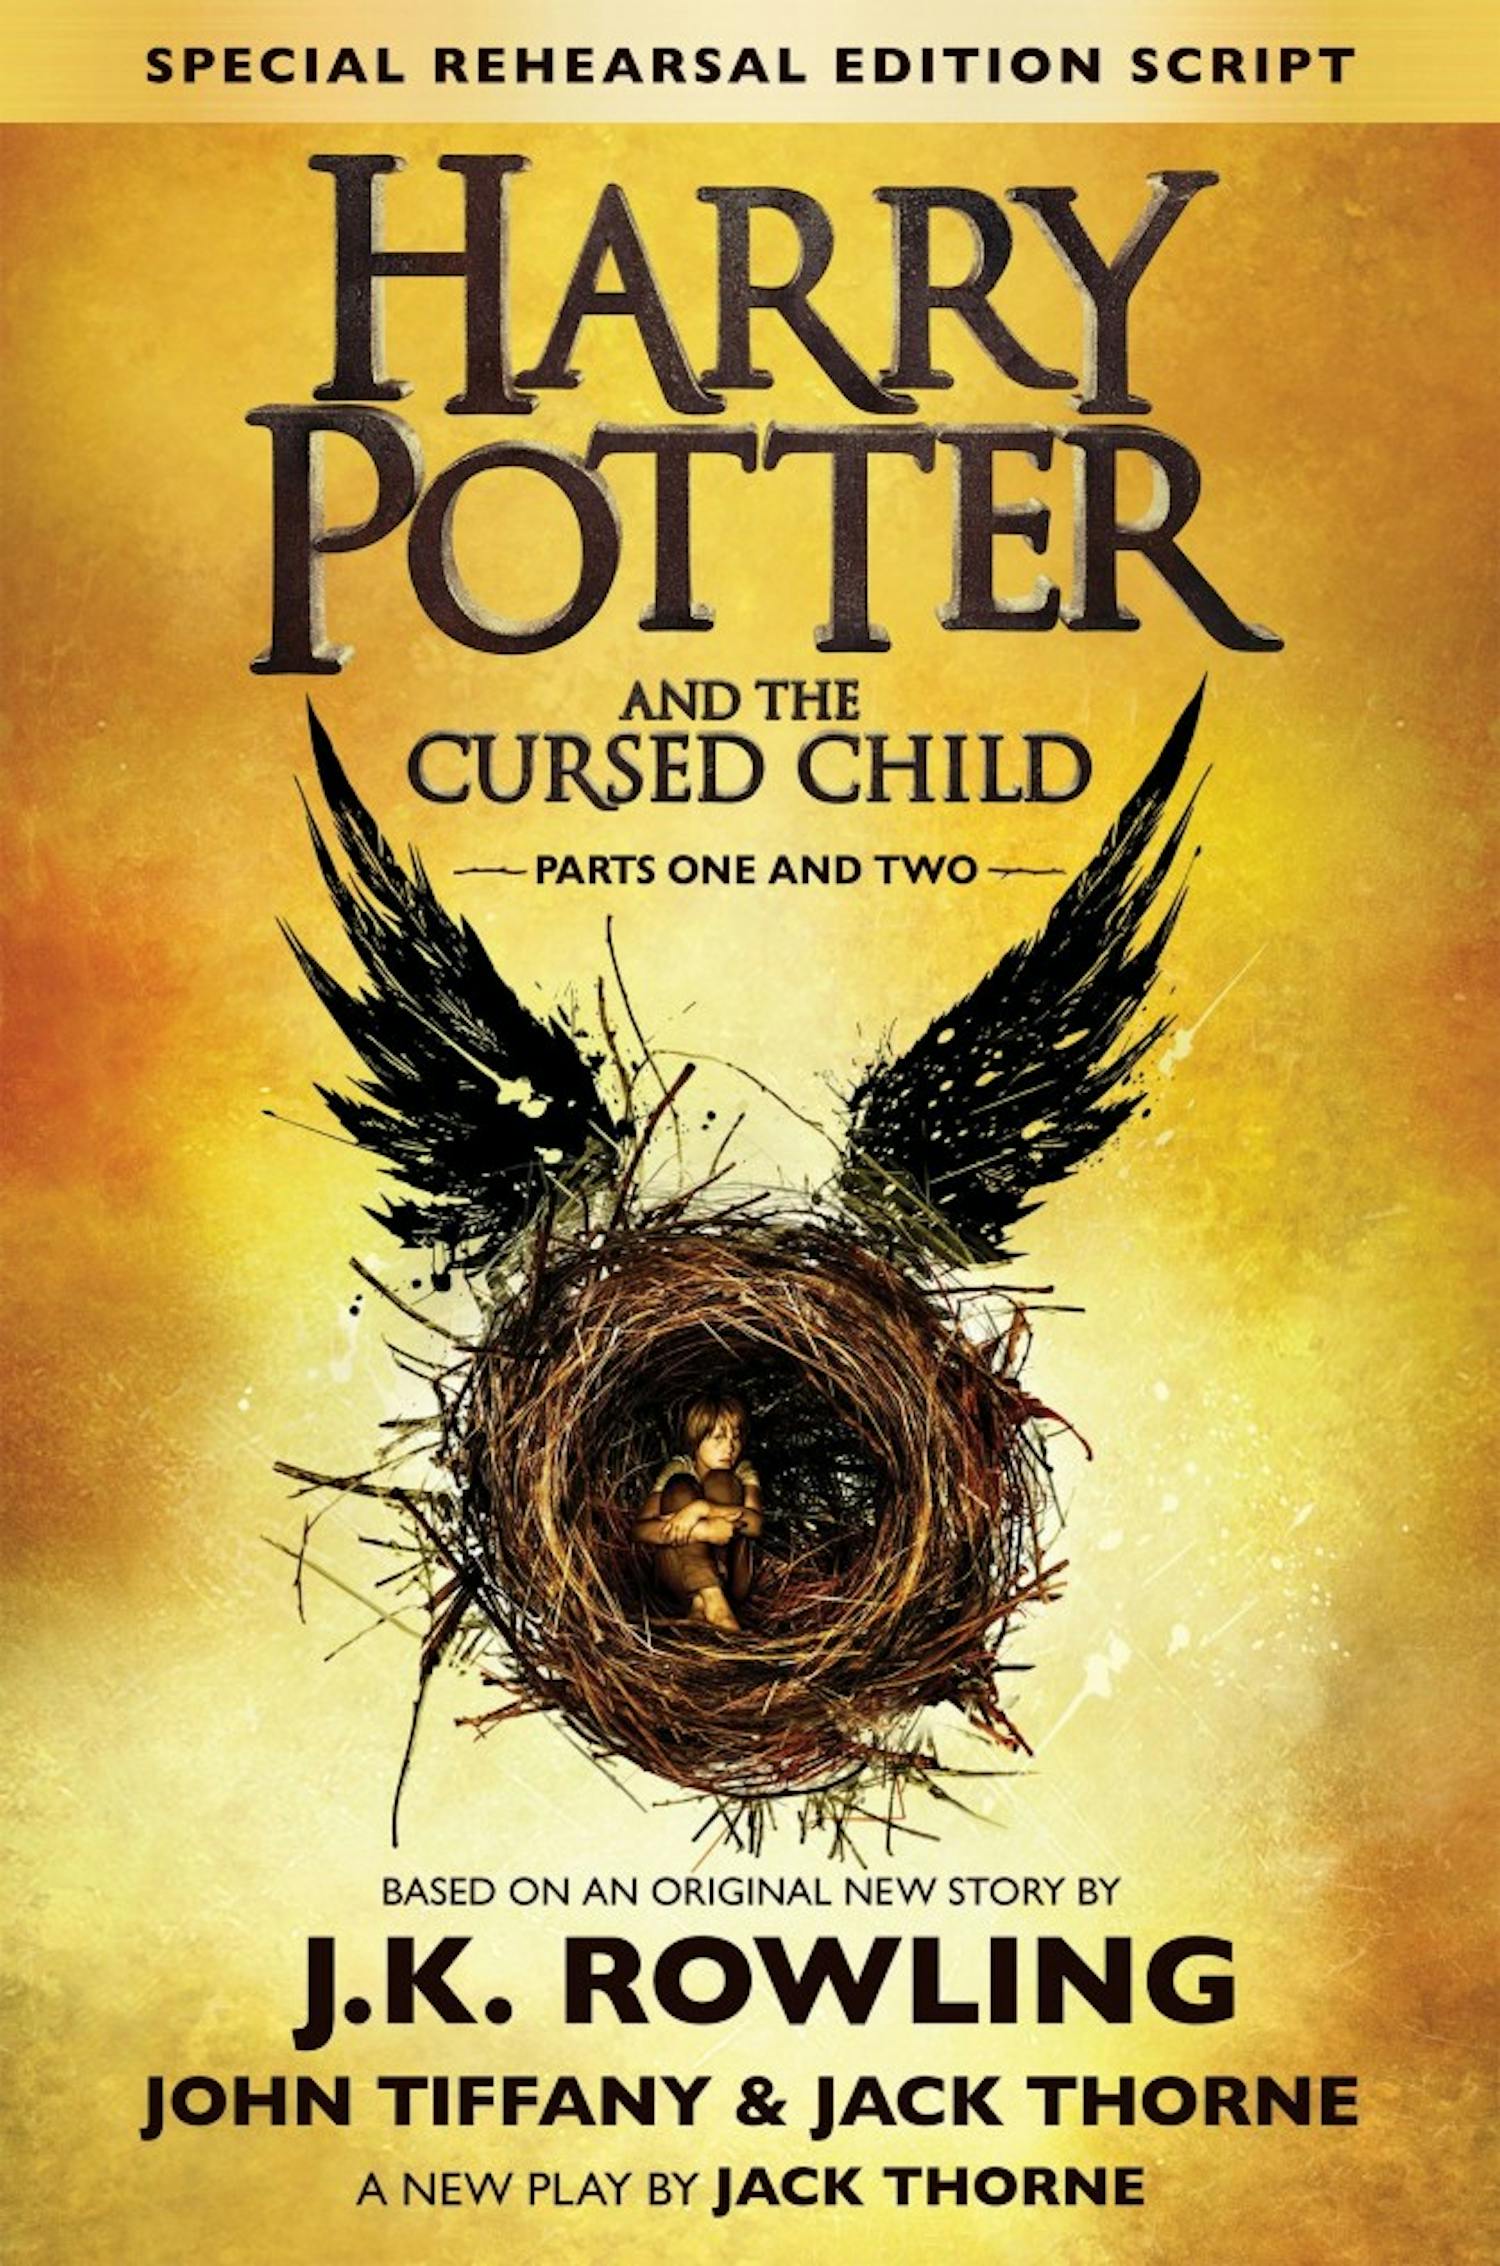 "Harry Potter and the Cursed Child" is a screenplay written by Jack Thorne and inspired by a short story by J. K. Rowling.